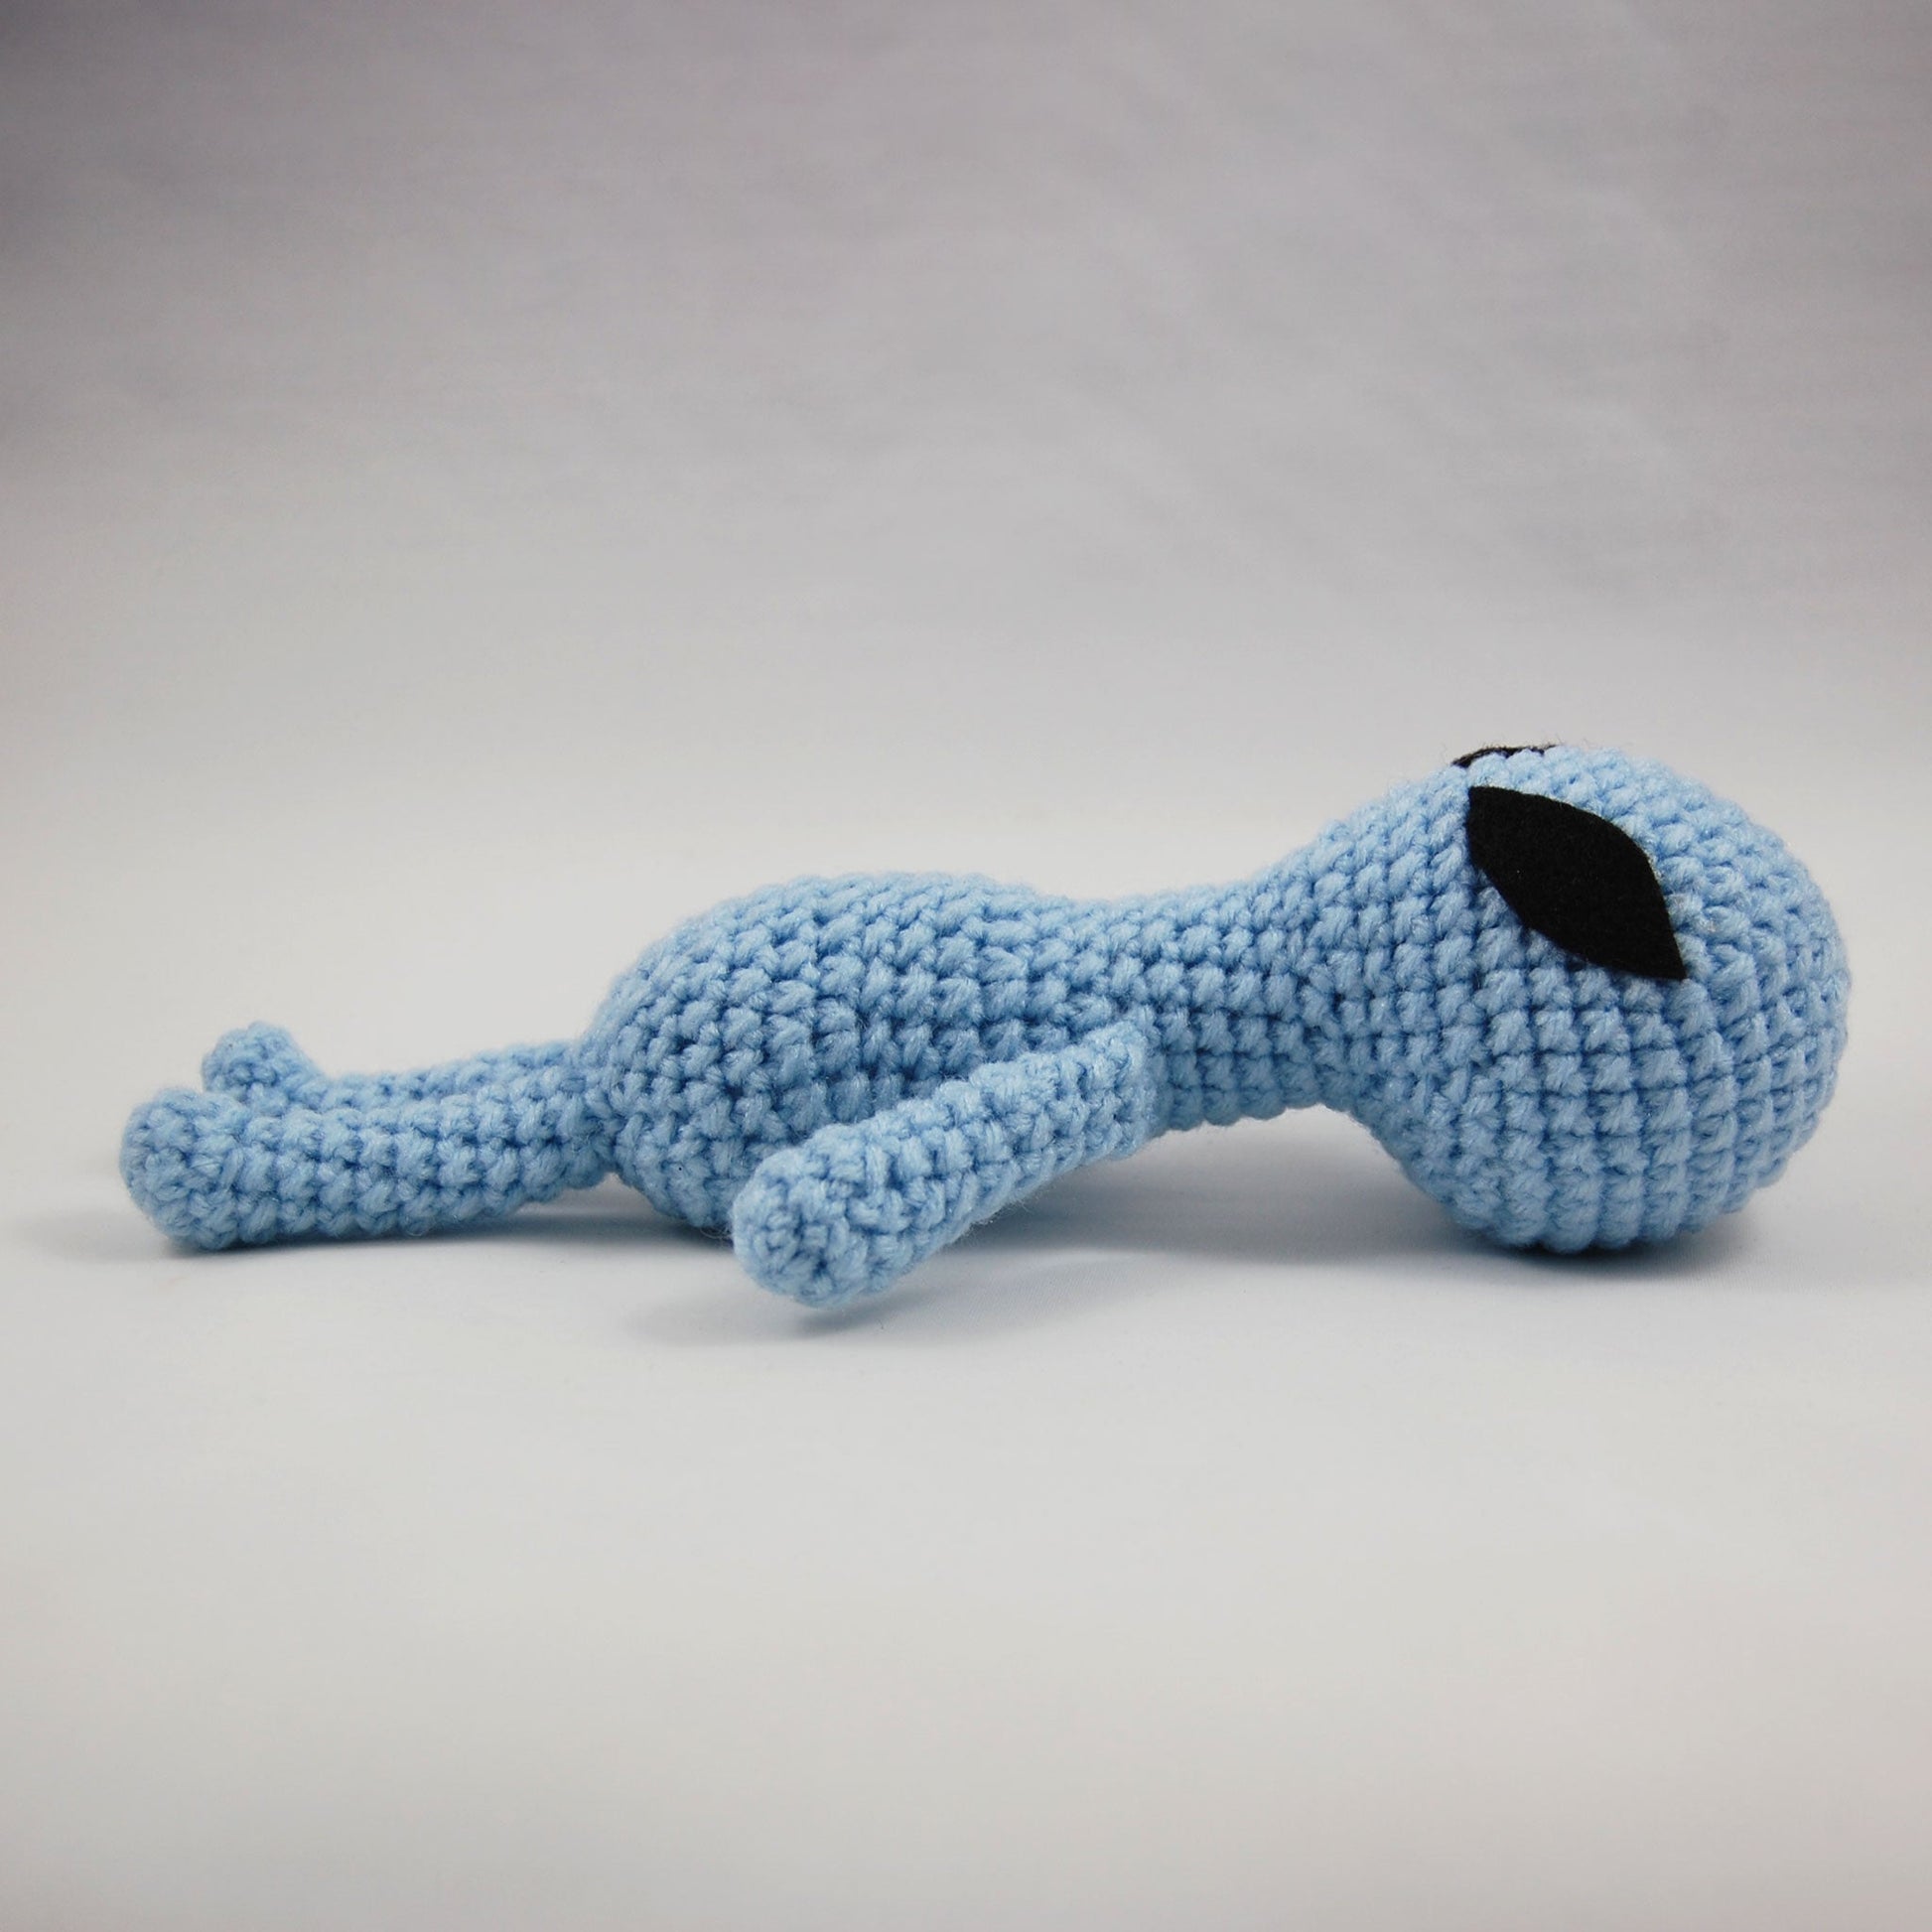 blue alien toy laying down